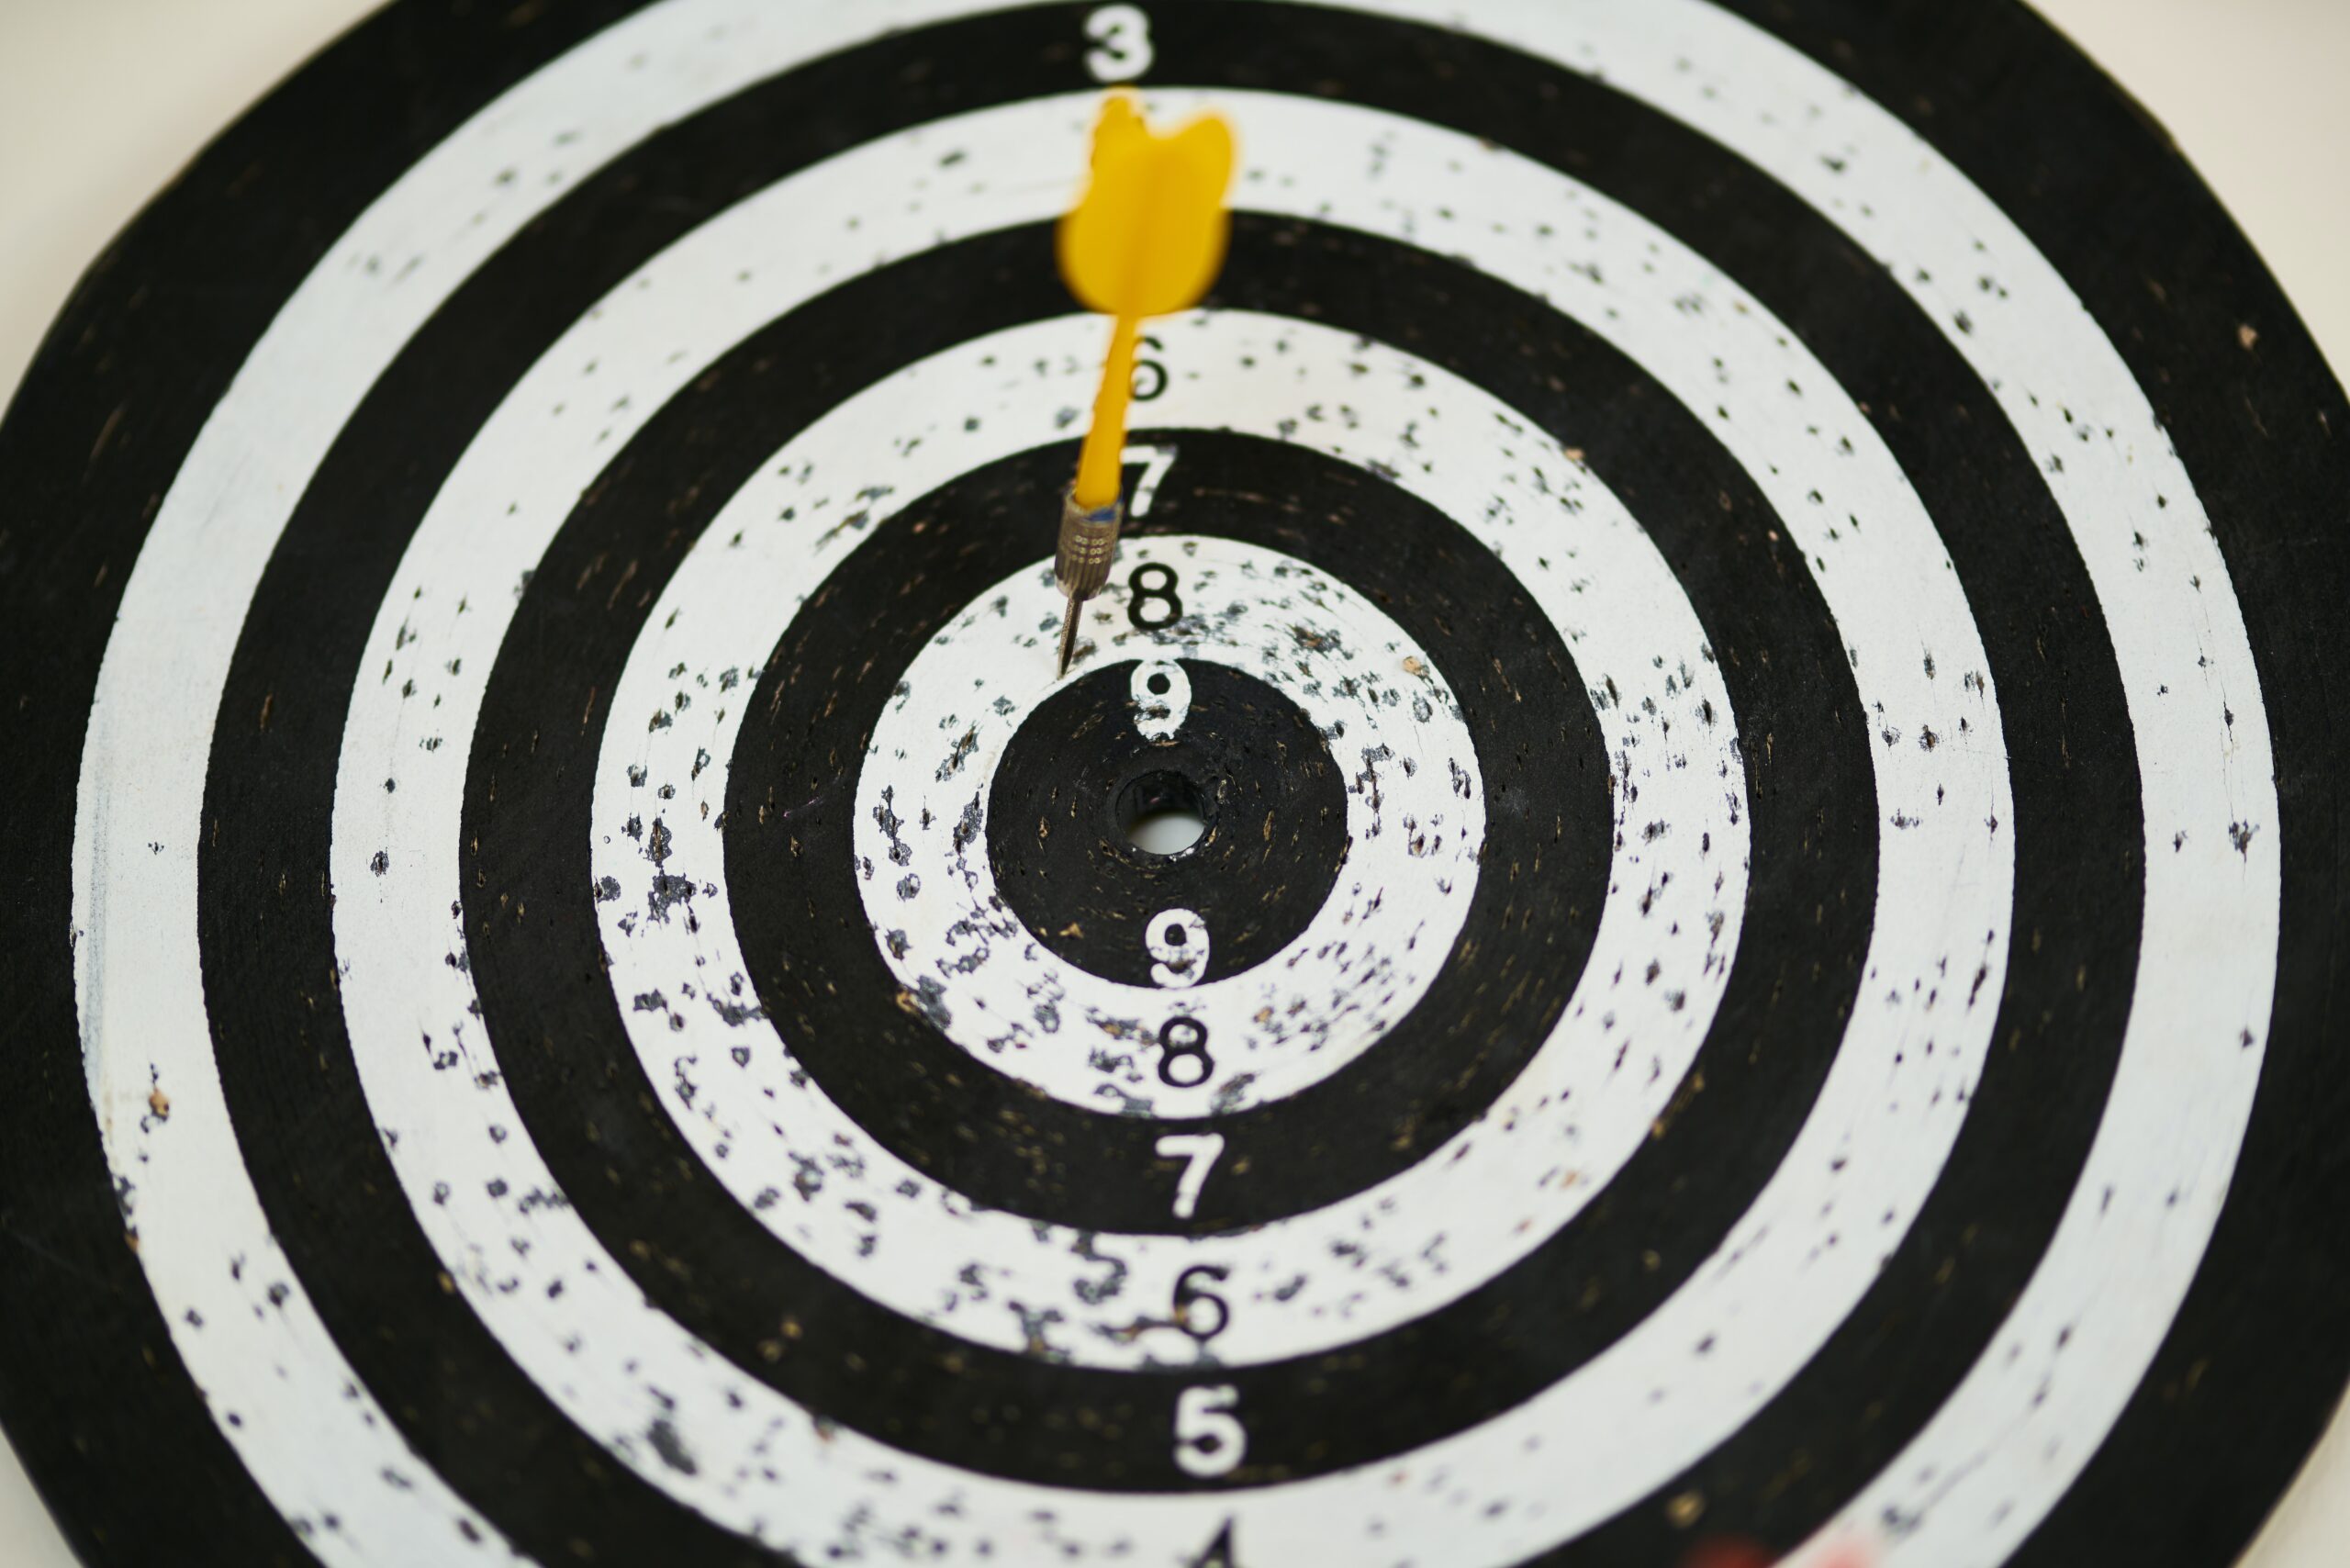 Decorative picture showing on target